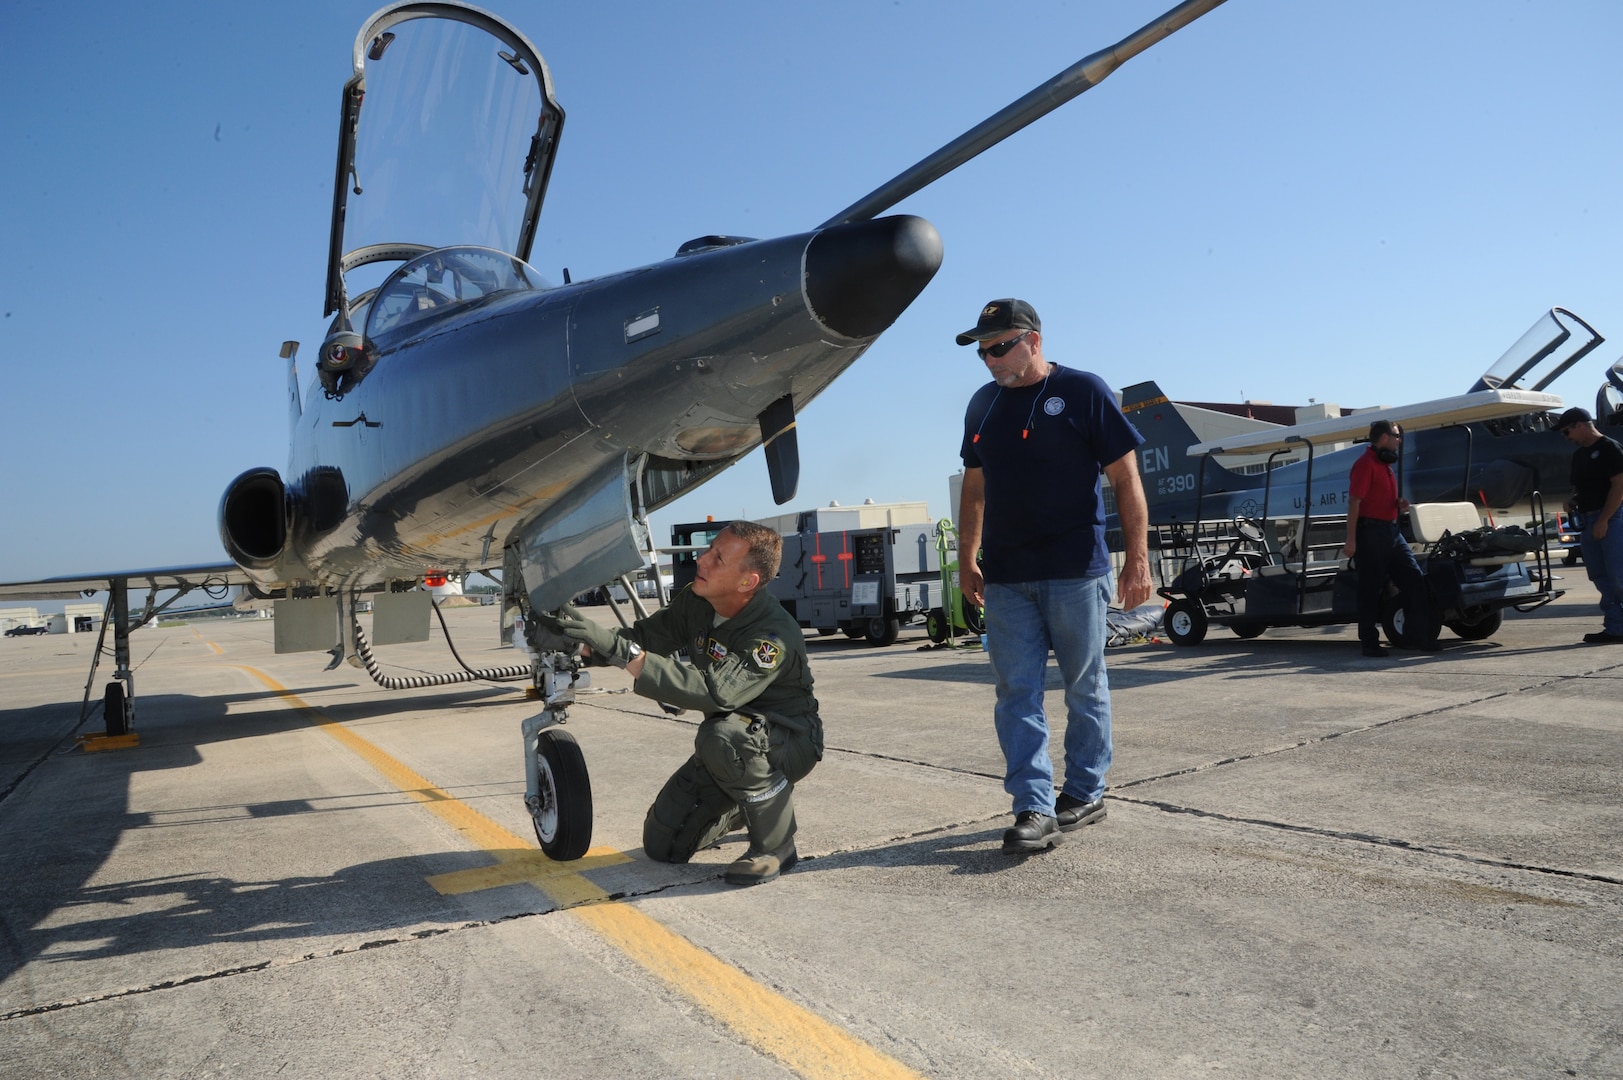 Keith Barnes (right), 571st Aircraft Maintenance Squadron contractor and Lt. Col. Ripley Woodard, 415th Flight Test Flight commander, perform checks on a T-38 Talon prior to takeoff May 17 from Joint Base San Antonio-Randolph, Texas. The T-38 is being returned to Sheppard Air Force Base, Texas after being modified by the 571st here. (U.S. Air Force photo by Rich McFadden) 